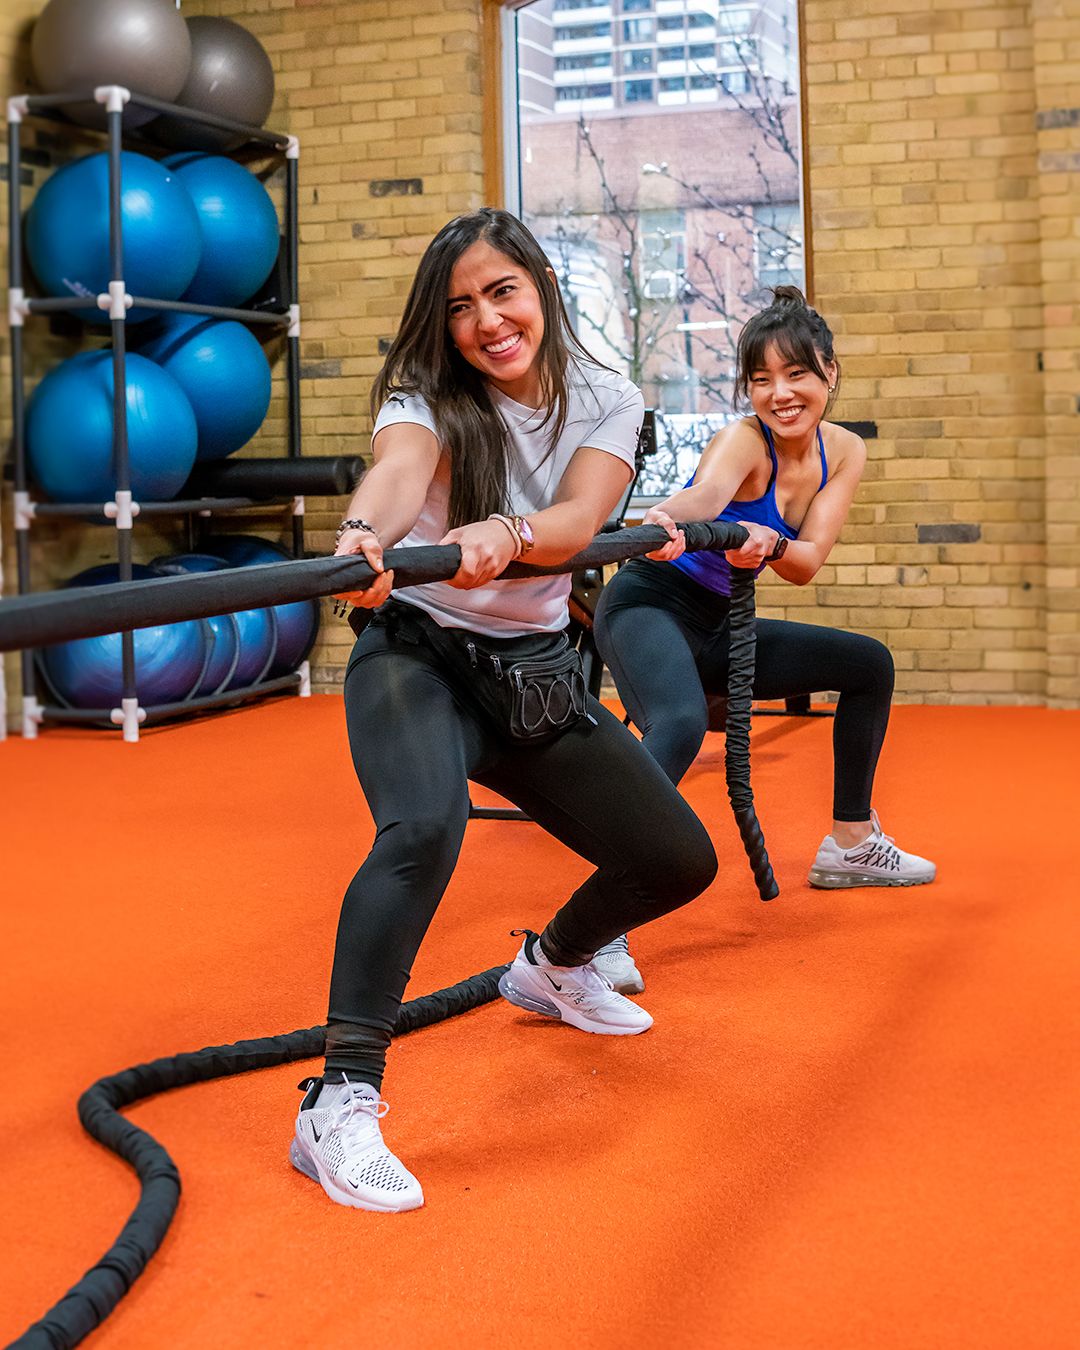 Hone Fitness, free for guests of the Anndore House. Photo credit: www.honefitness.com